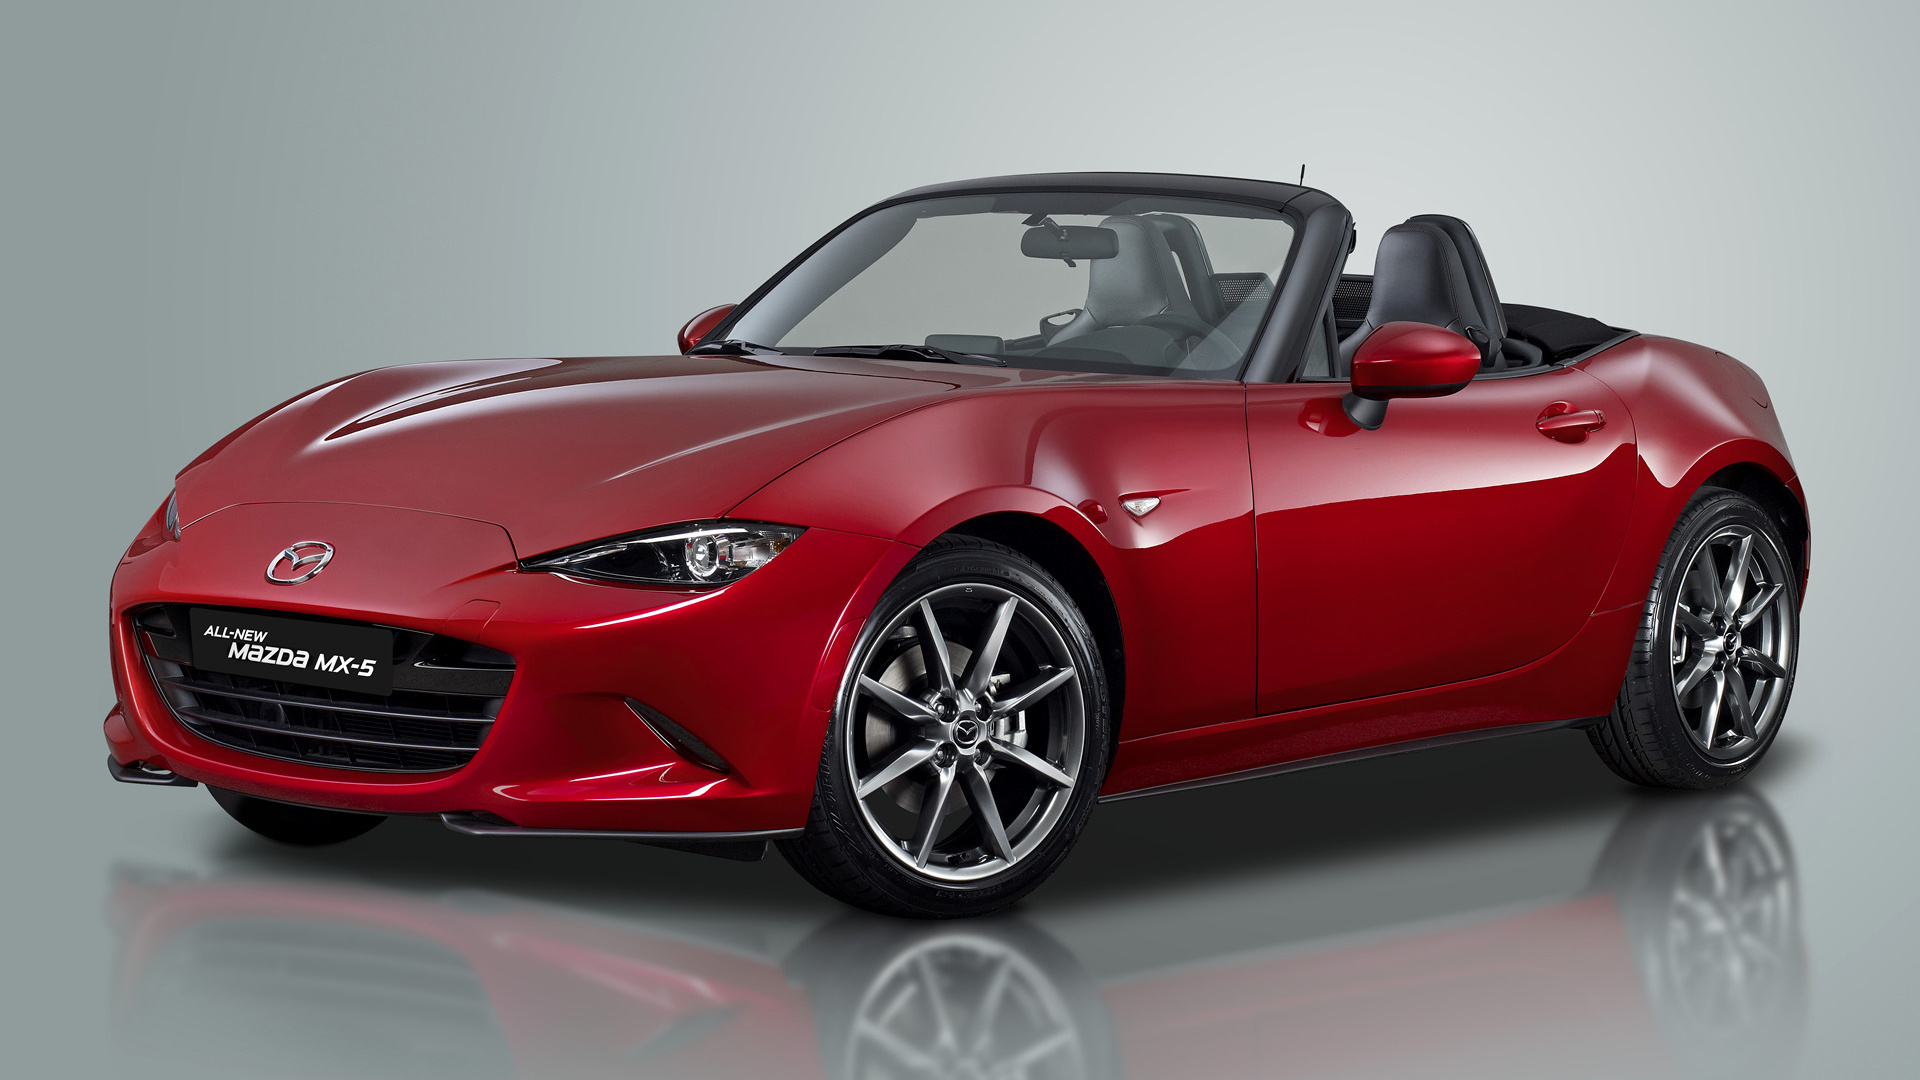 Mazda MX-5, Striking wallpapers, High-quality images, Car enthusiasts' delight, 1920x1080 Full HD Desktop